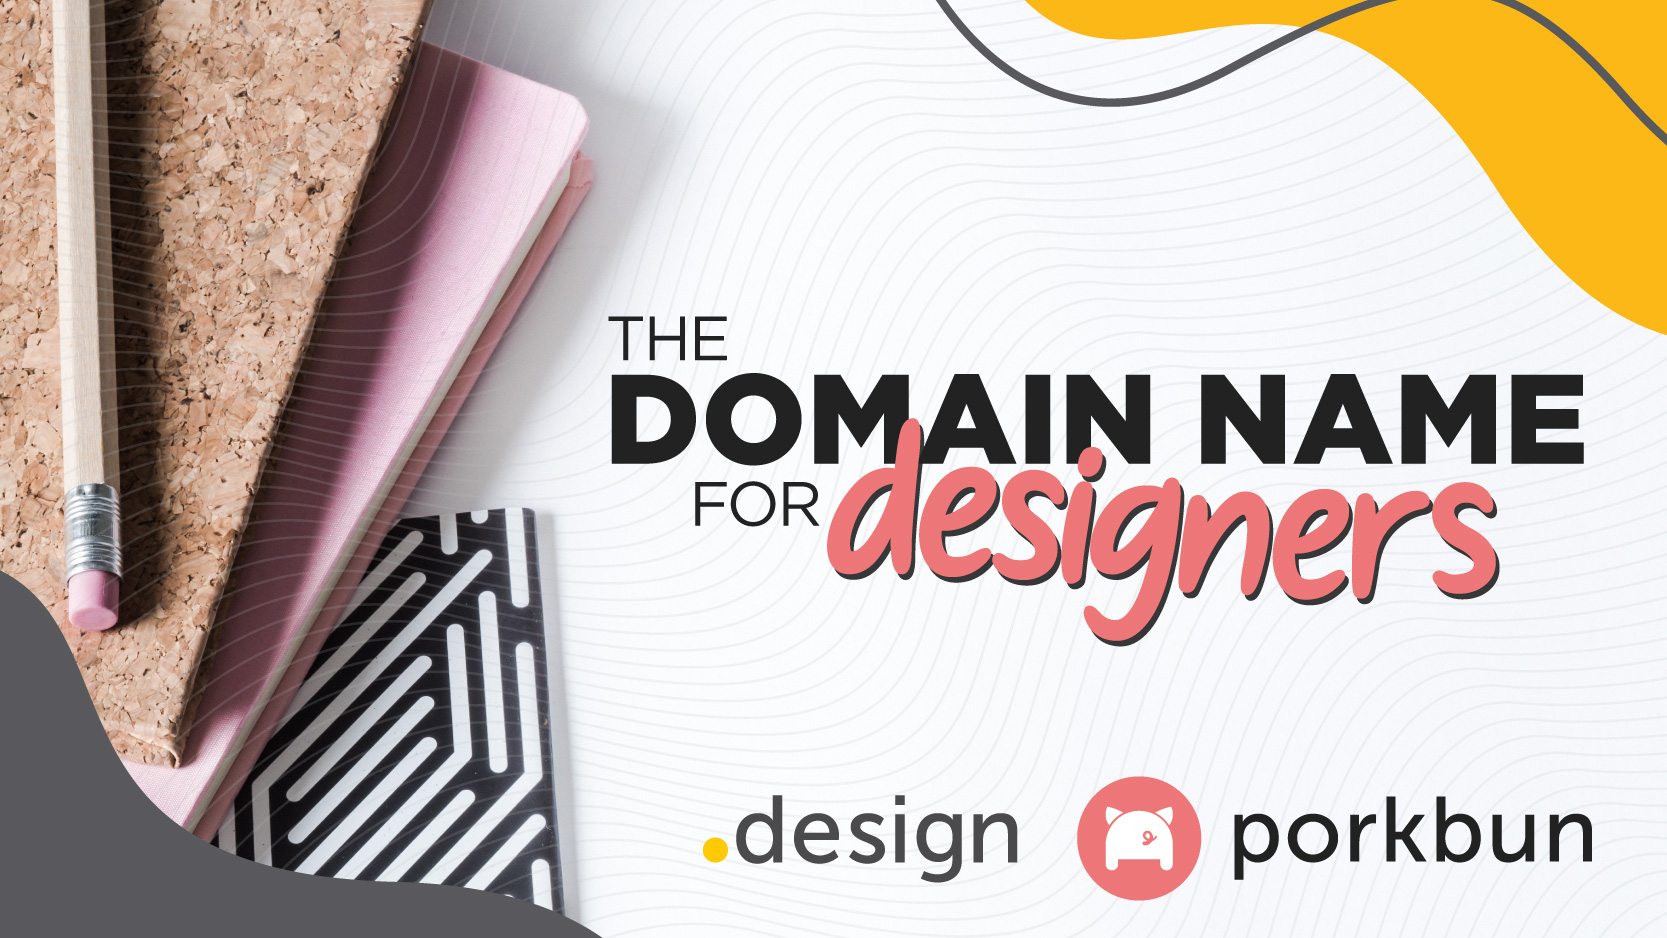 Get Creative with a FREE .design Domain Name!